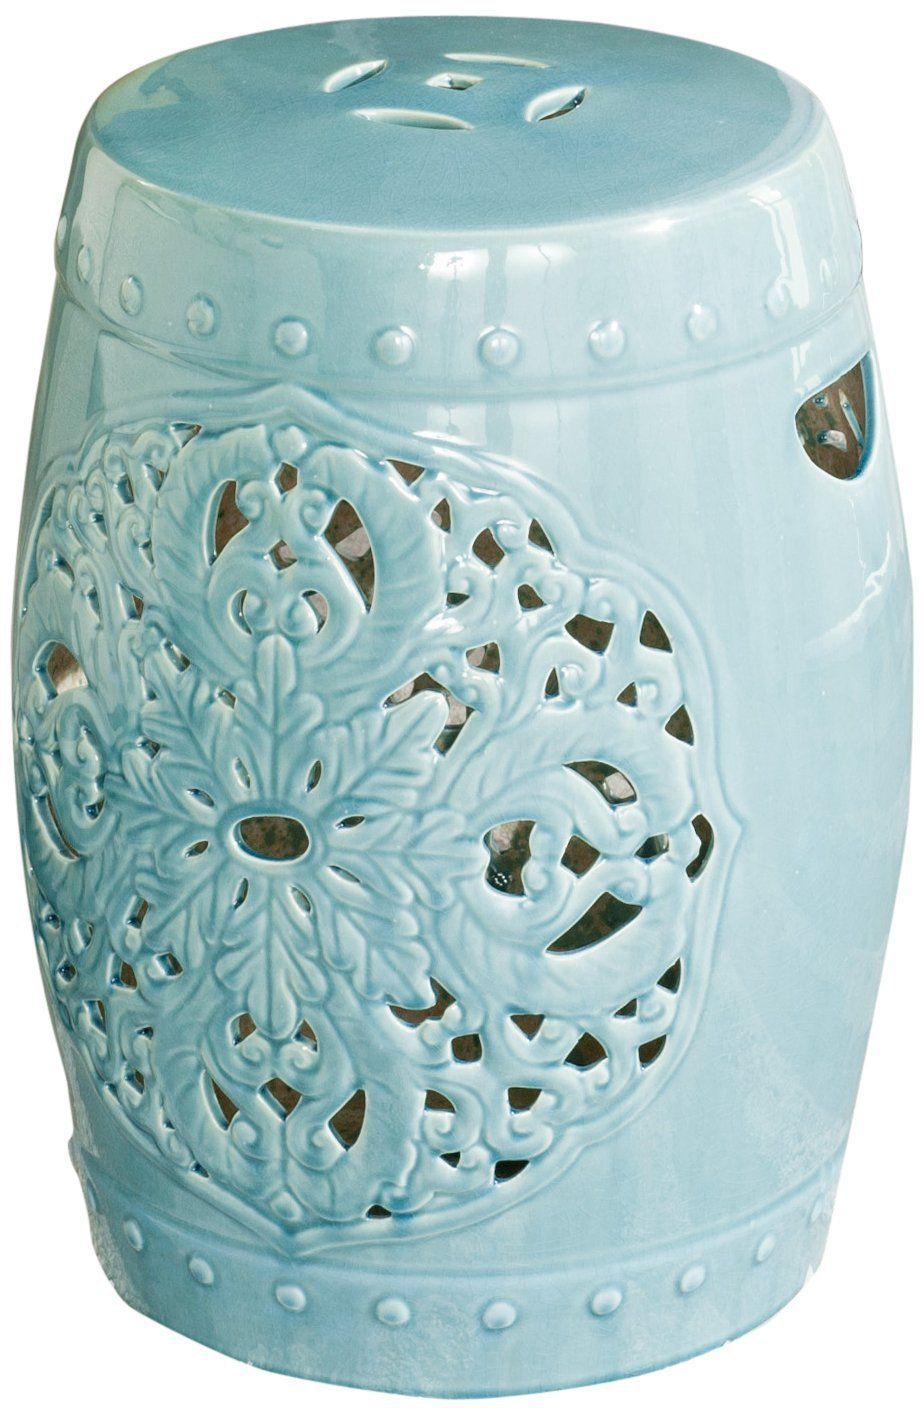 Amazon: Safavieh Castle Garden'S Collection Glazed Intended For Horsforth Garden Stools (View 16 of 25)